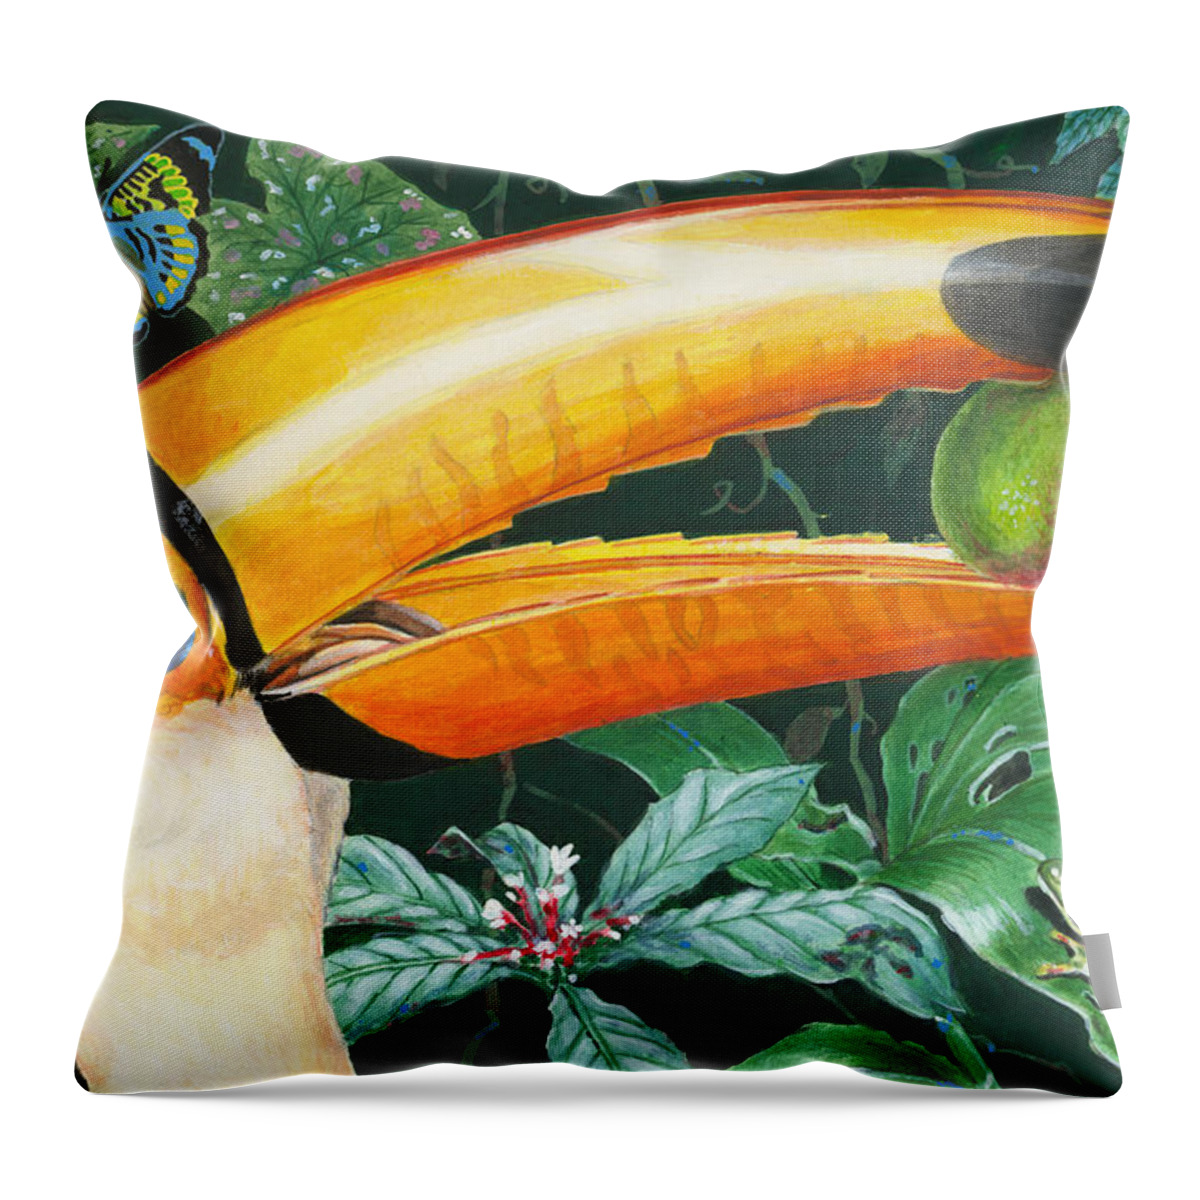 Rain Forest Throw Pillow featuring the painting Tropical Rain Forest Toucan by Richard De Wolfe